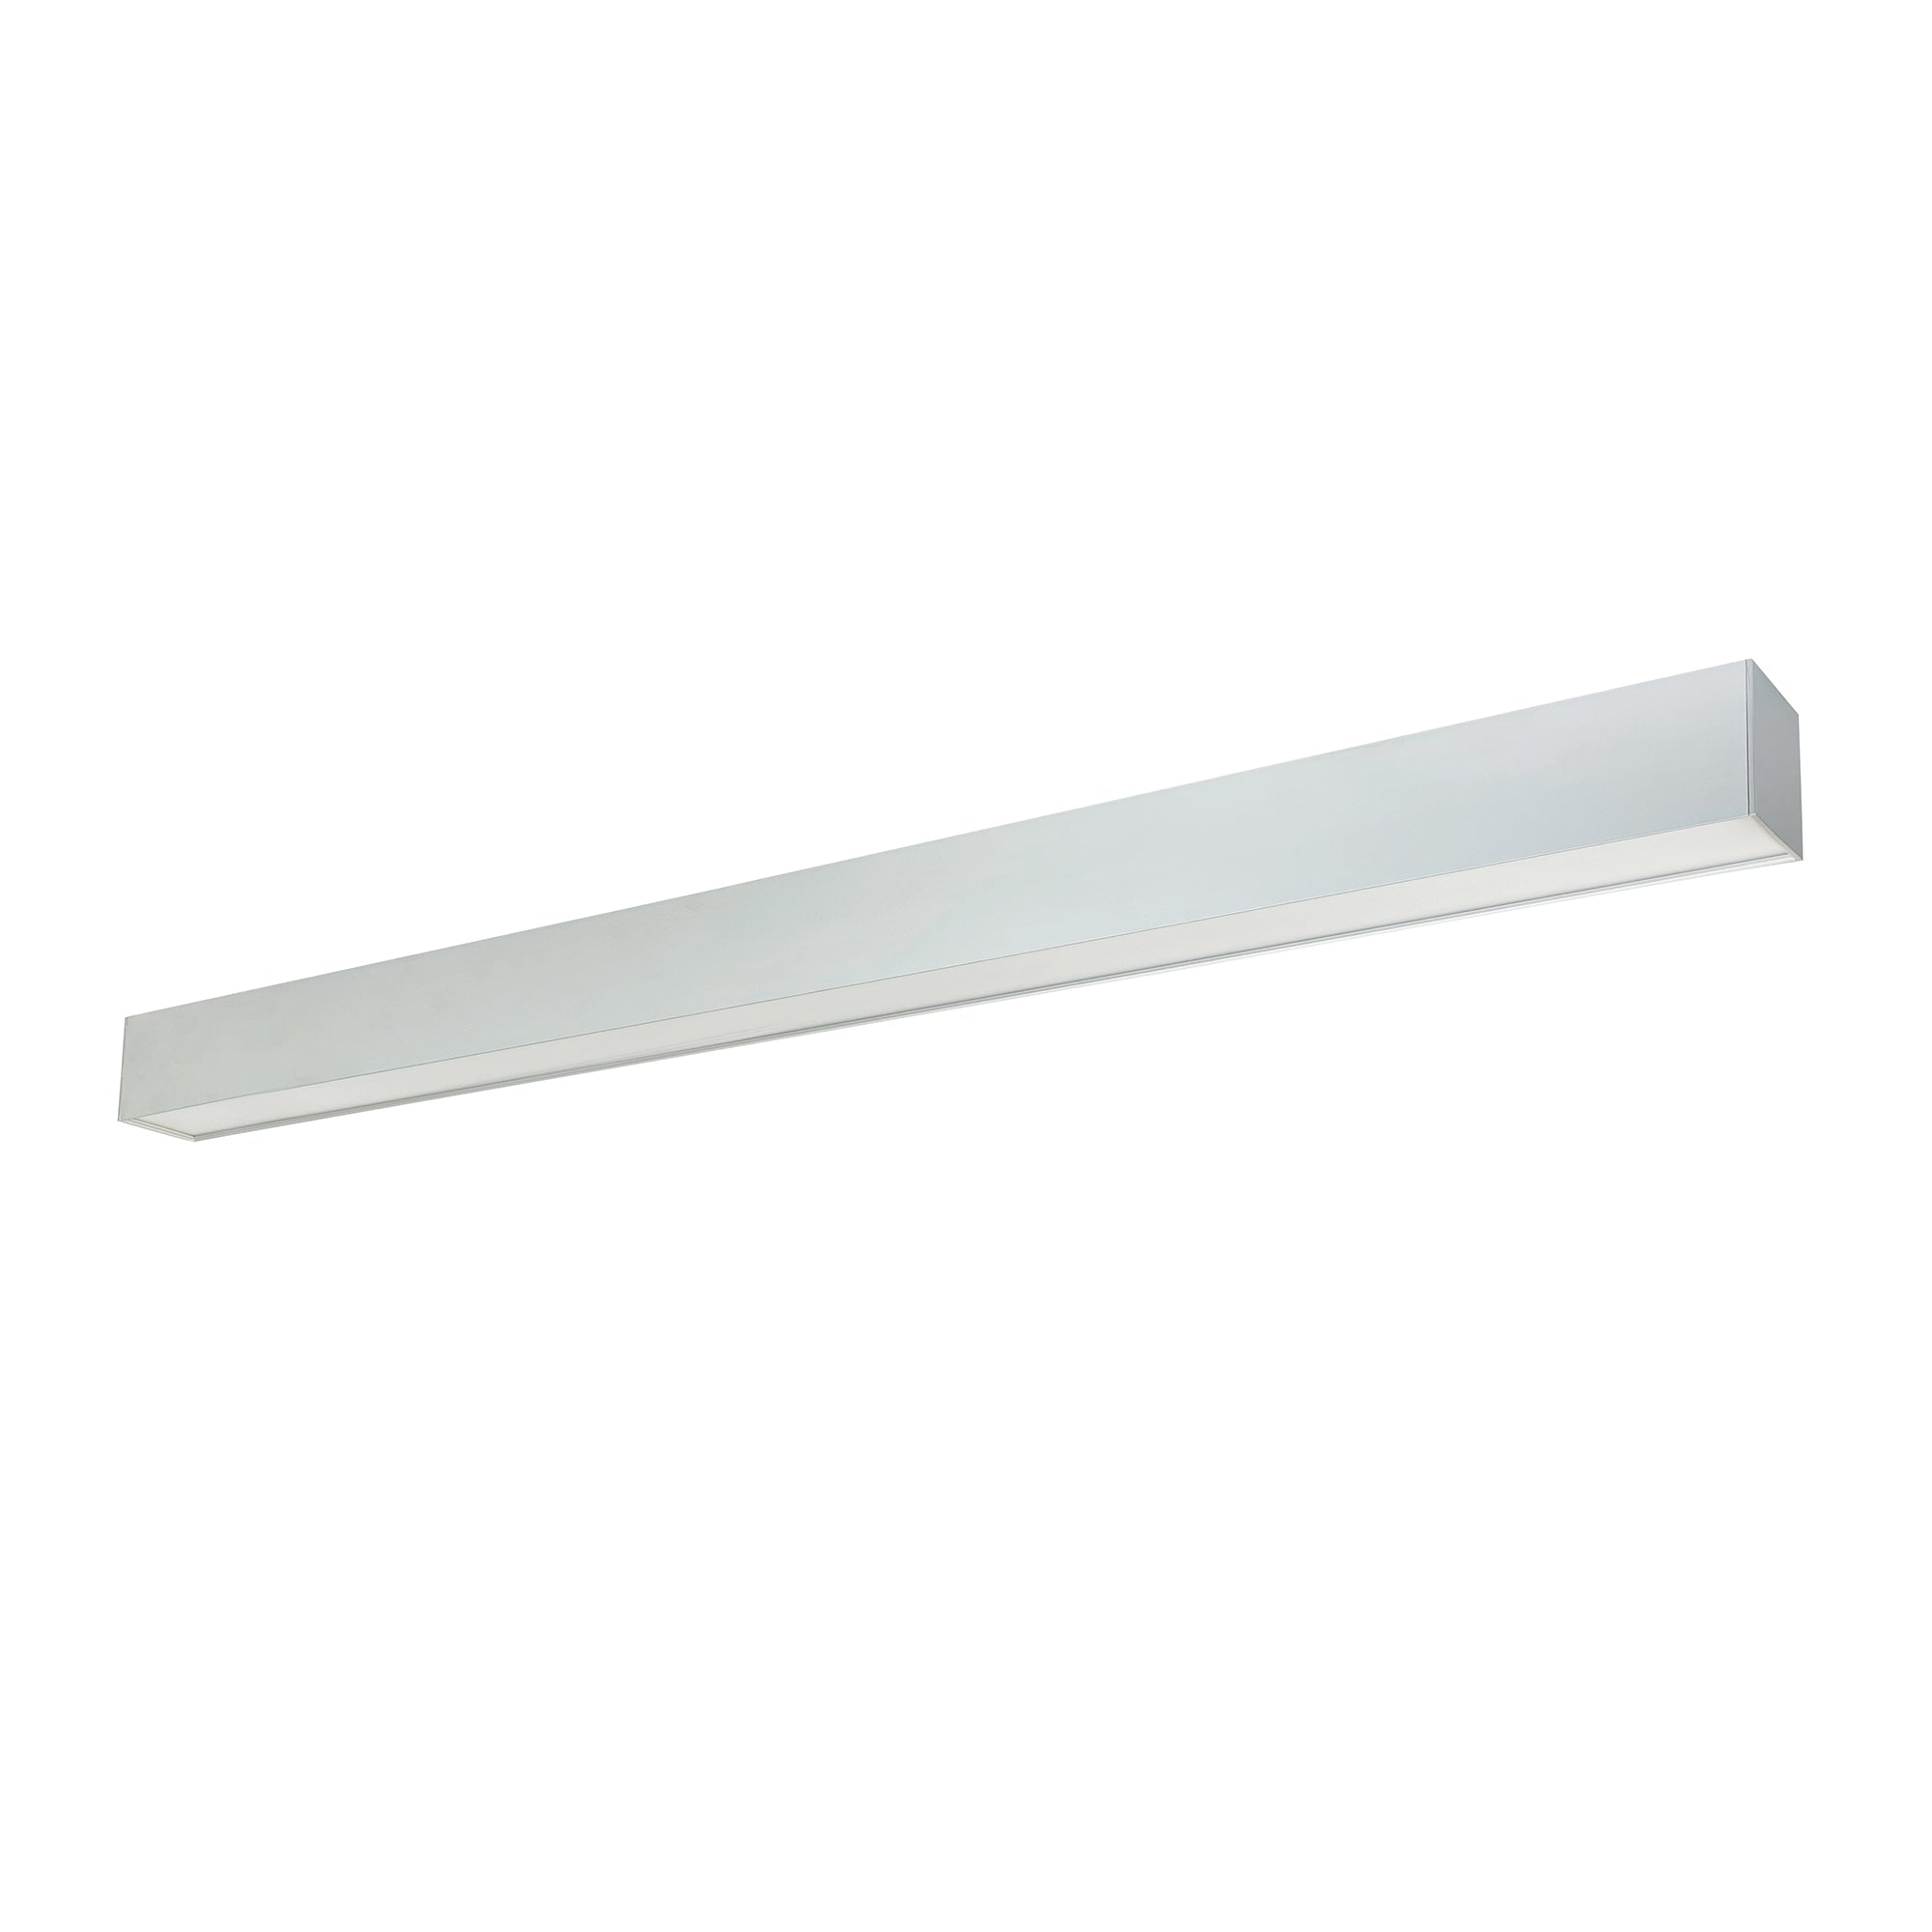 Nora Lighting NLUD-4334A/EM - Linear - 4' L-Line LED Indirect/Direct Linear, 6152lm / Selectable CCT, Aluminum Finish, with EM